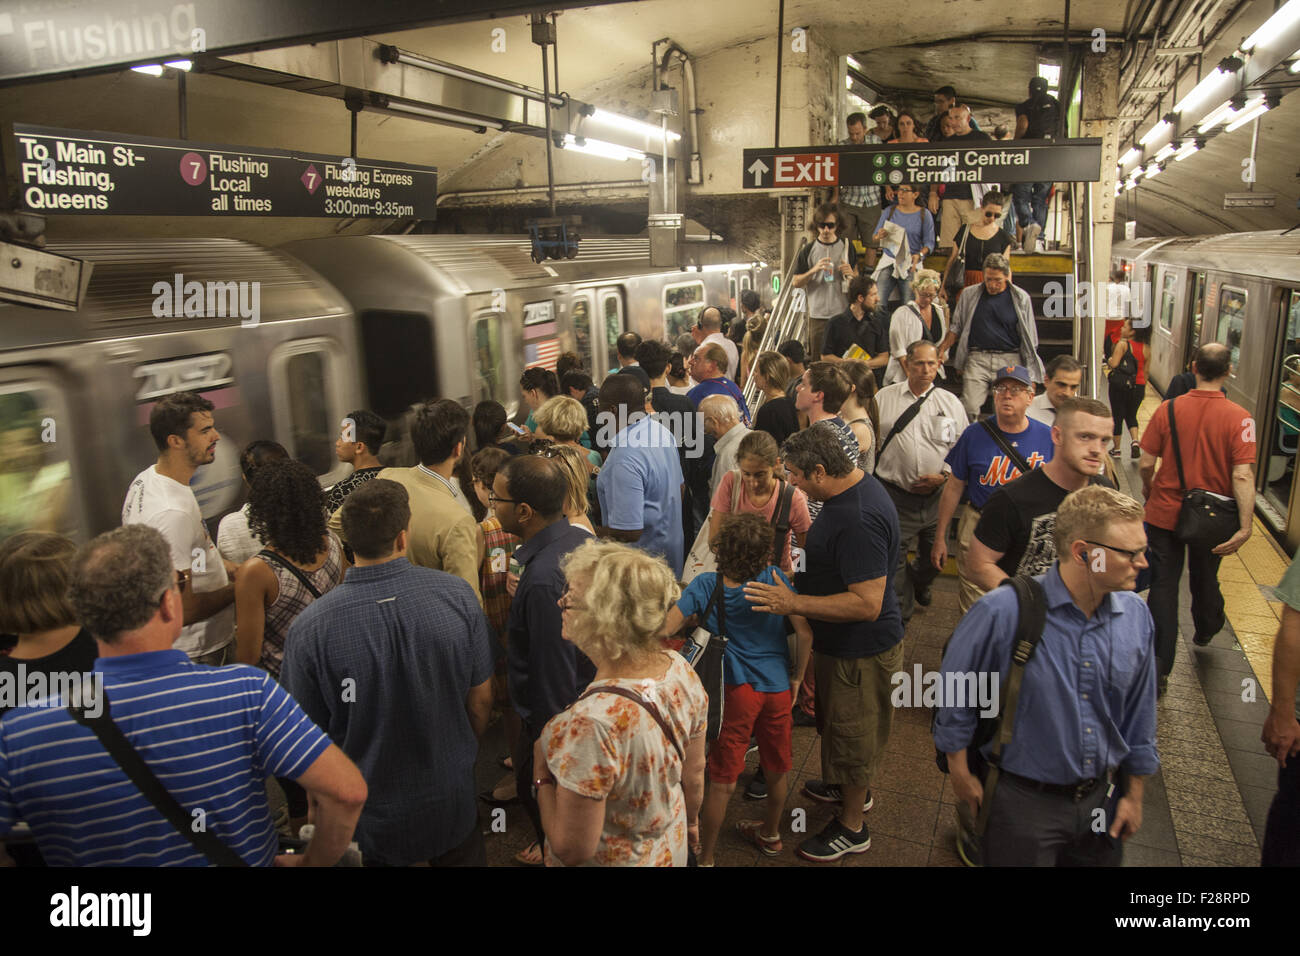 Evening rush hour at Grand Central Station on the platform of the #7 subway train line. NYC Stock Photo